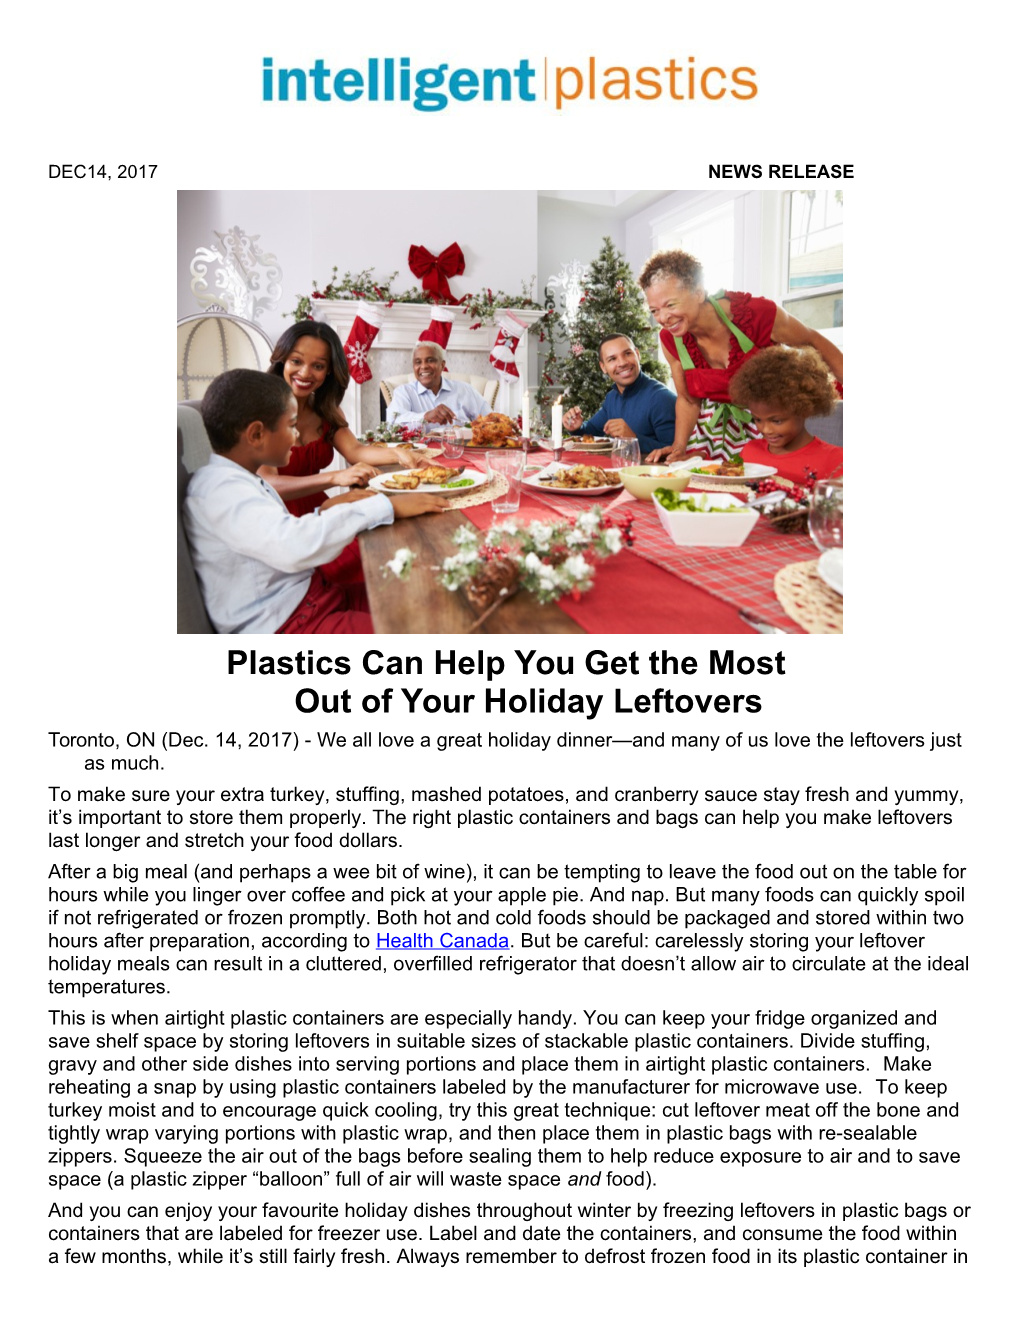 Plastics Can Help You Get the Most out of Your Holiday Leftovers